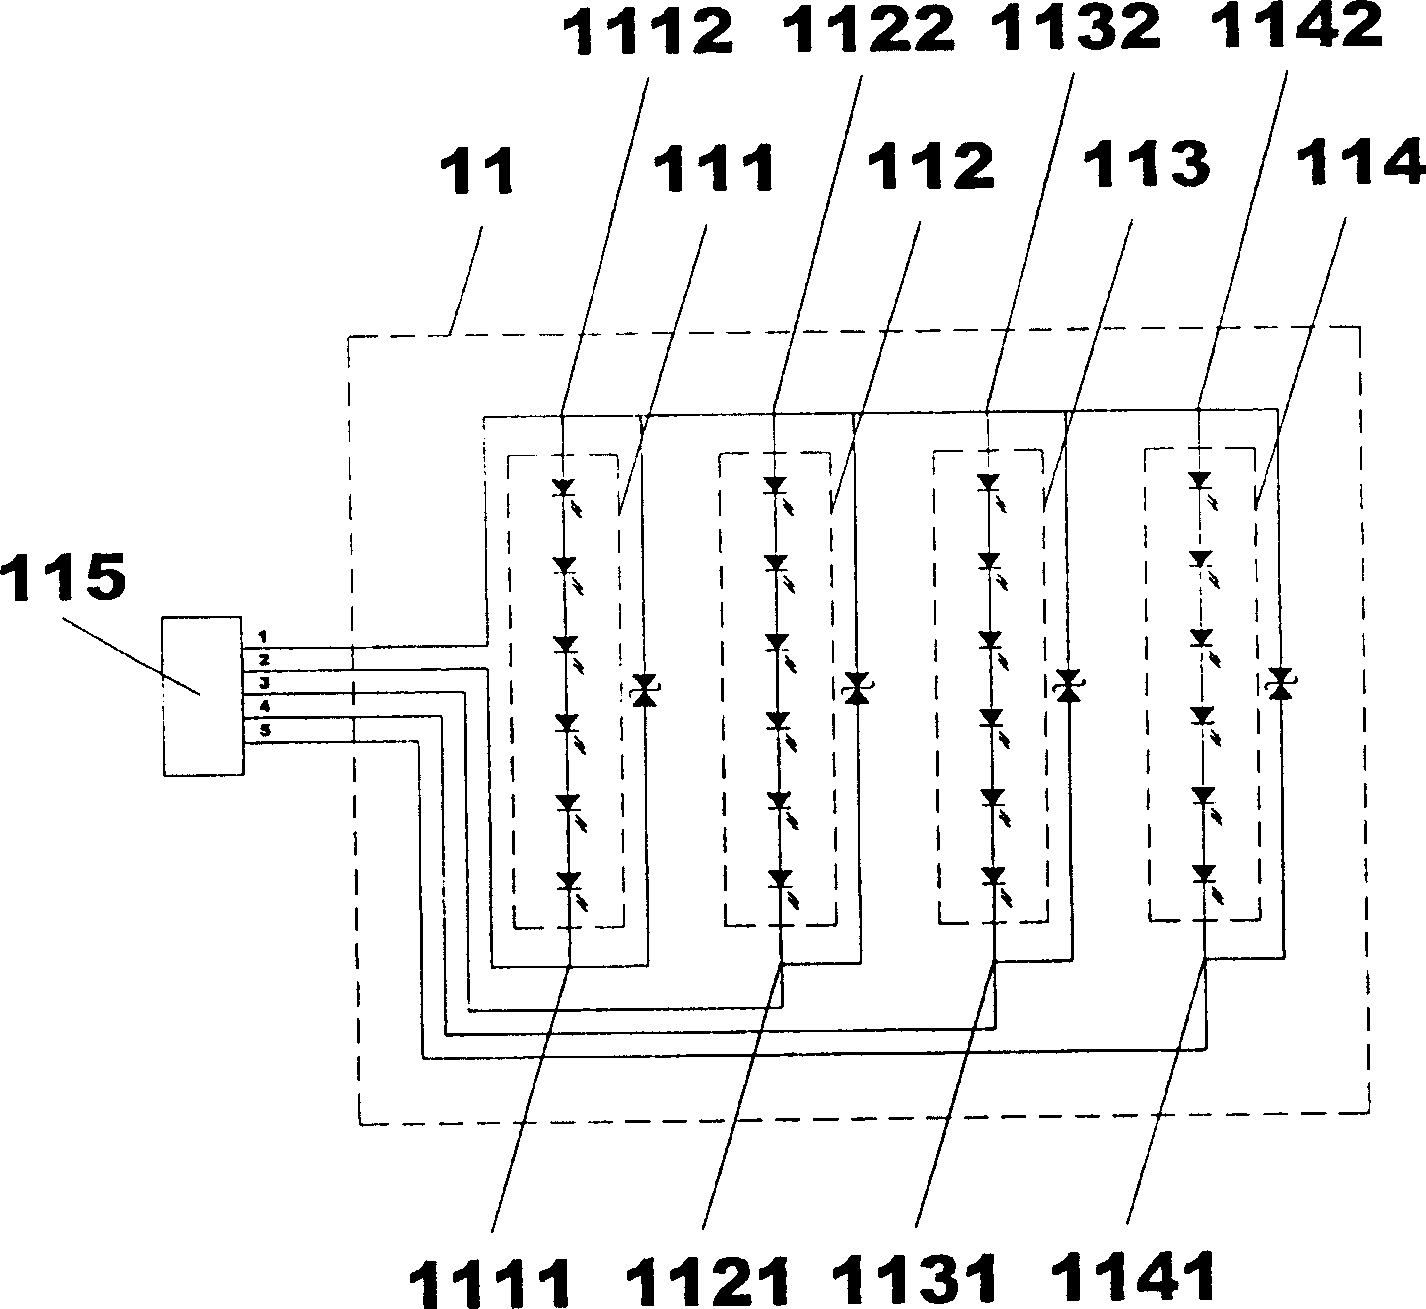 Backlight module structure